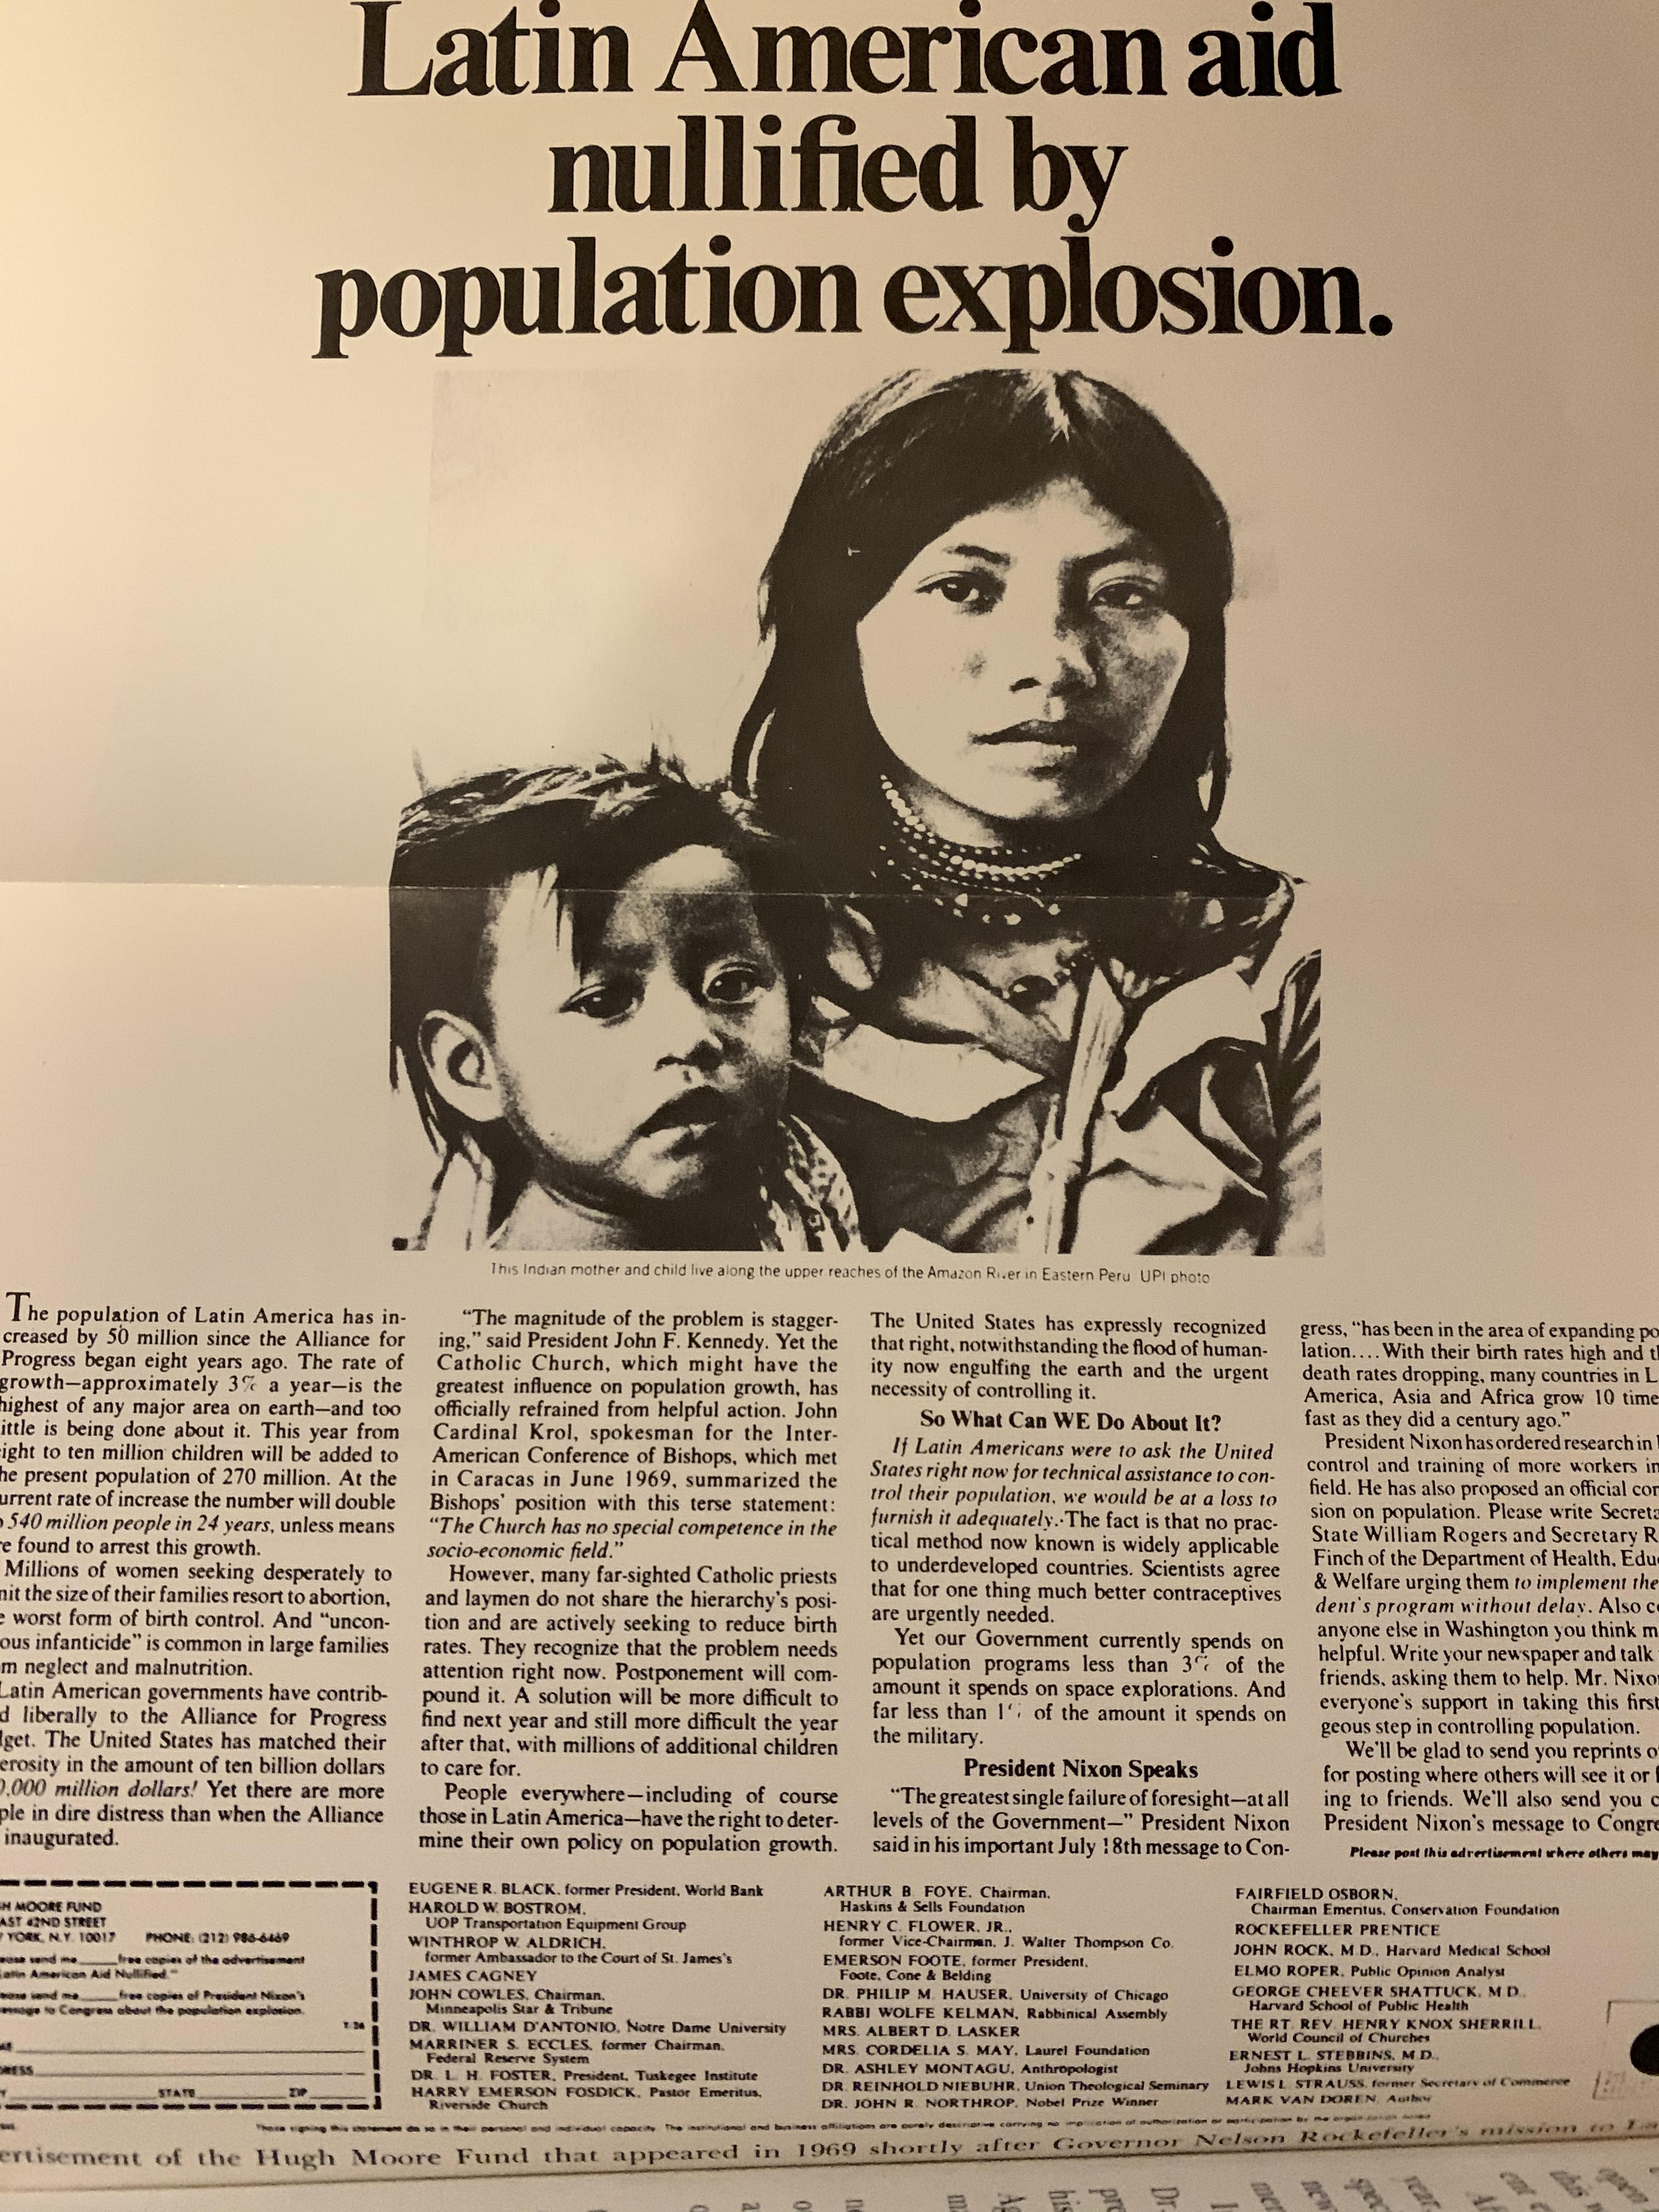 Image: Hugh Moore Fund 1969 ad signed by Cordilia Scaife May against Latin immigration